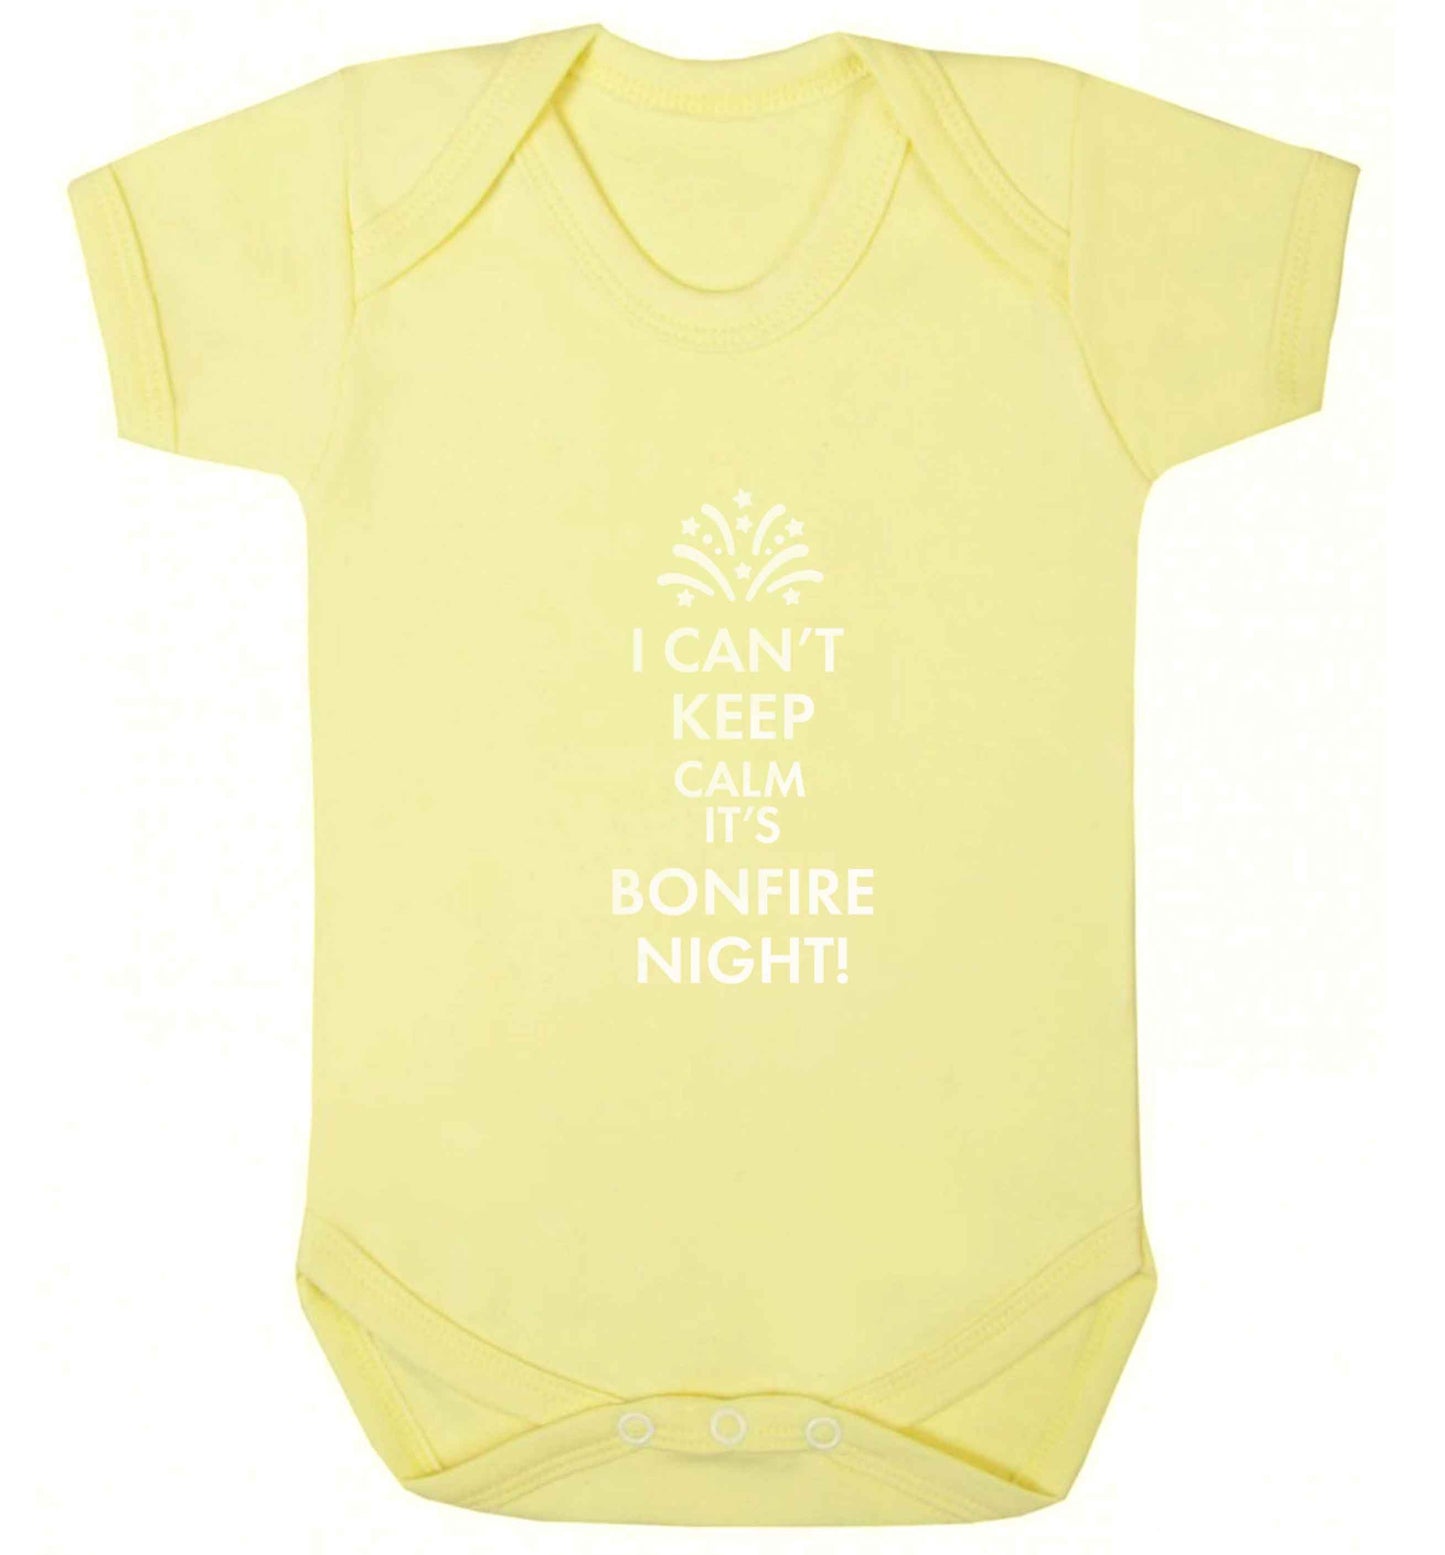 I can't keep calm its bonfire night baby vest pale yellow 18-24 months